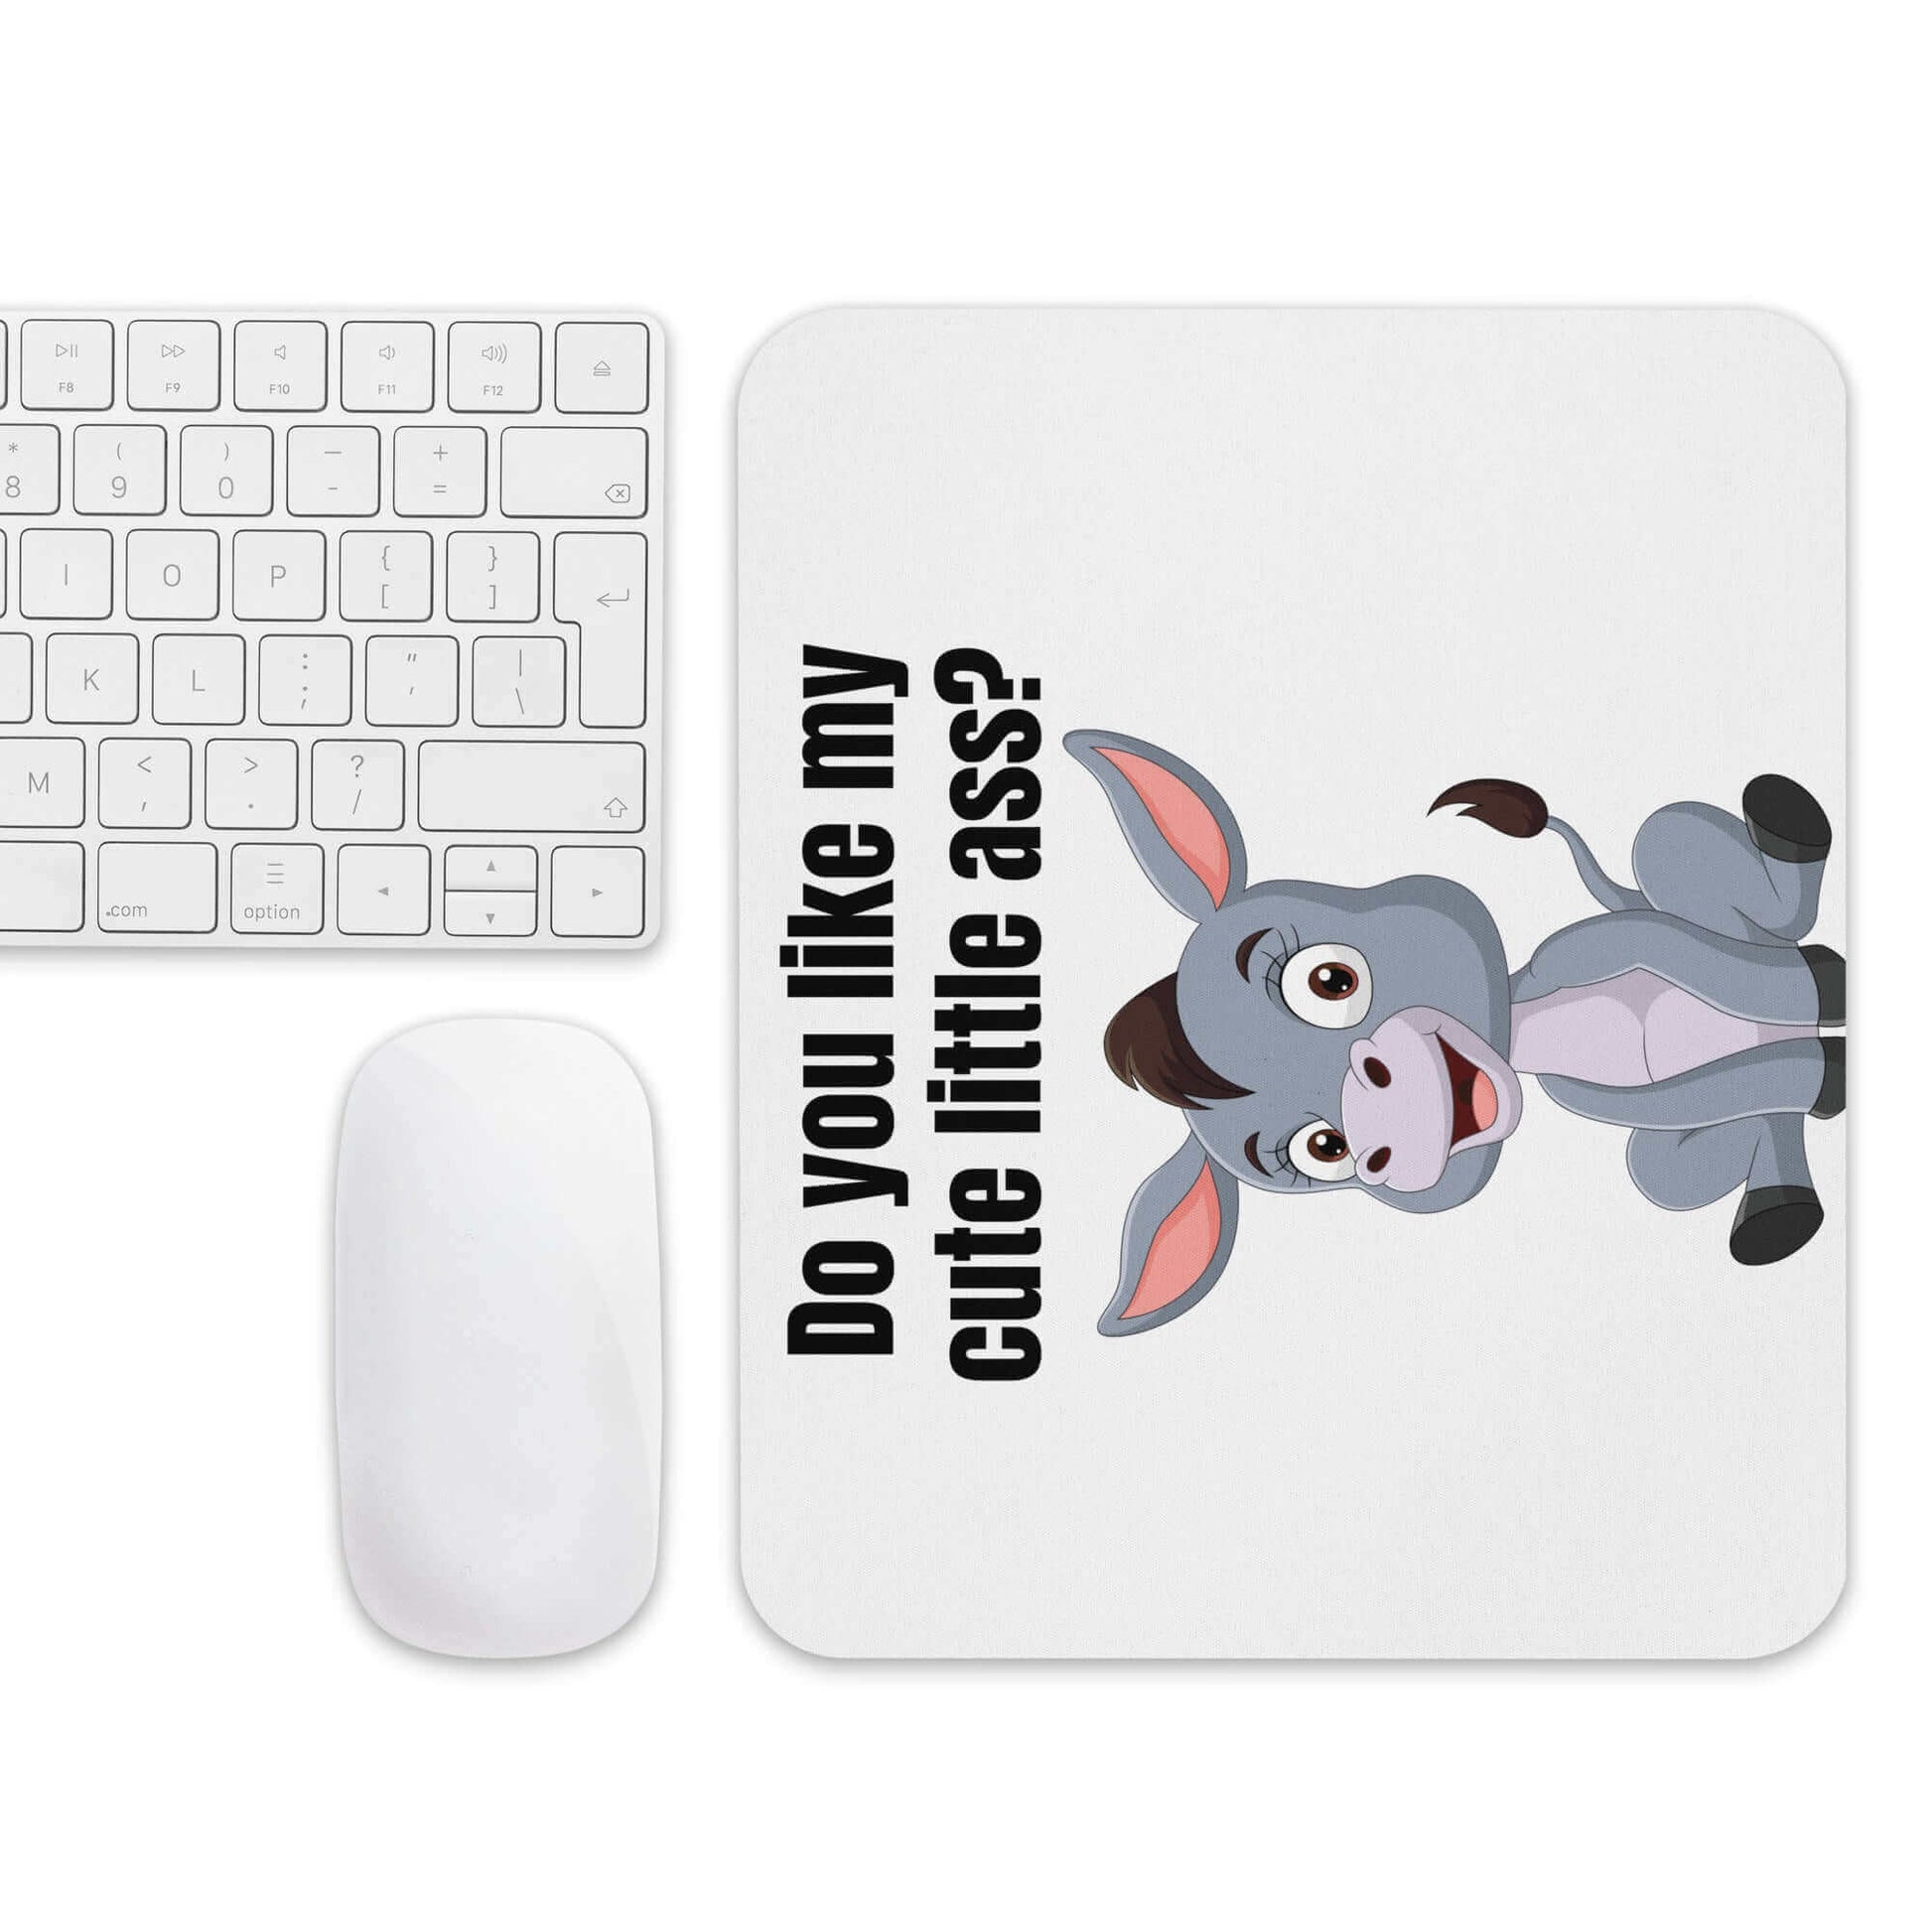 Do you like my cute little ass? - Mouse pad - Horrible Designs